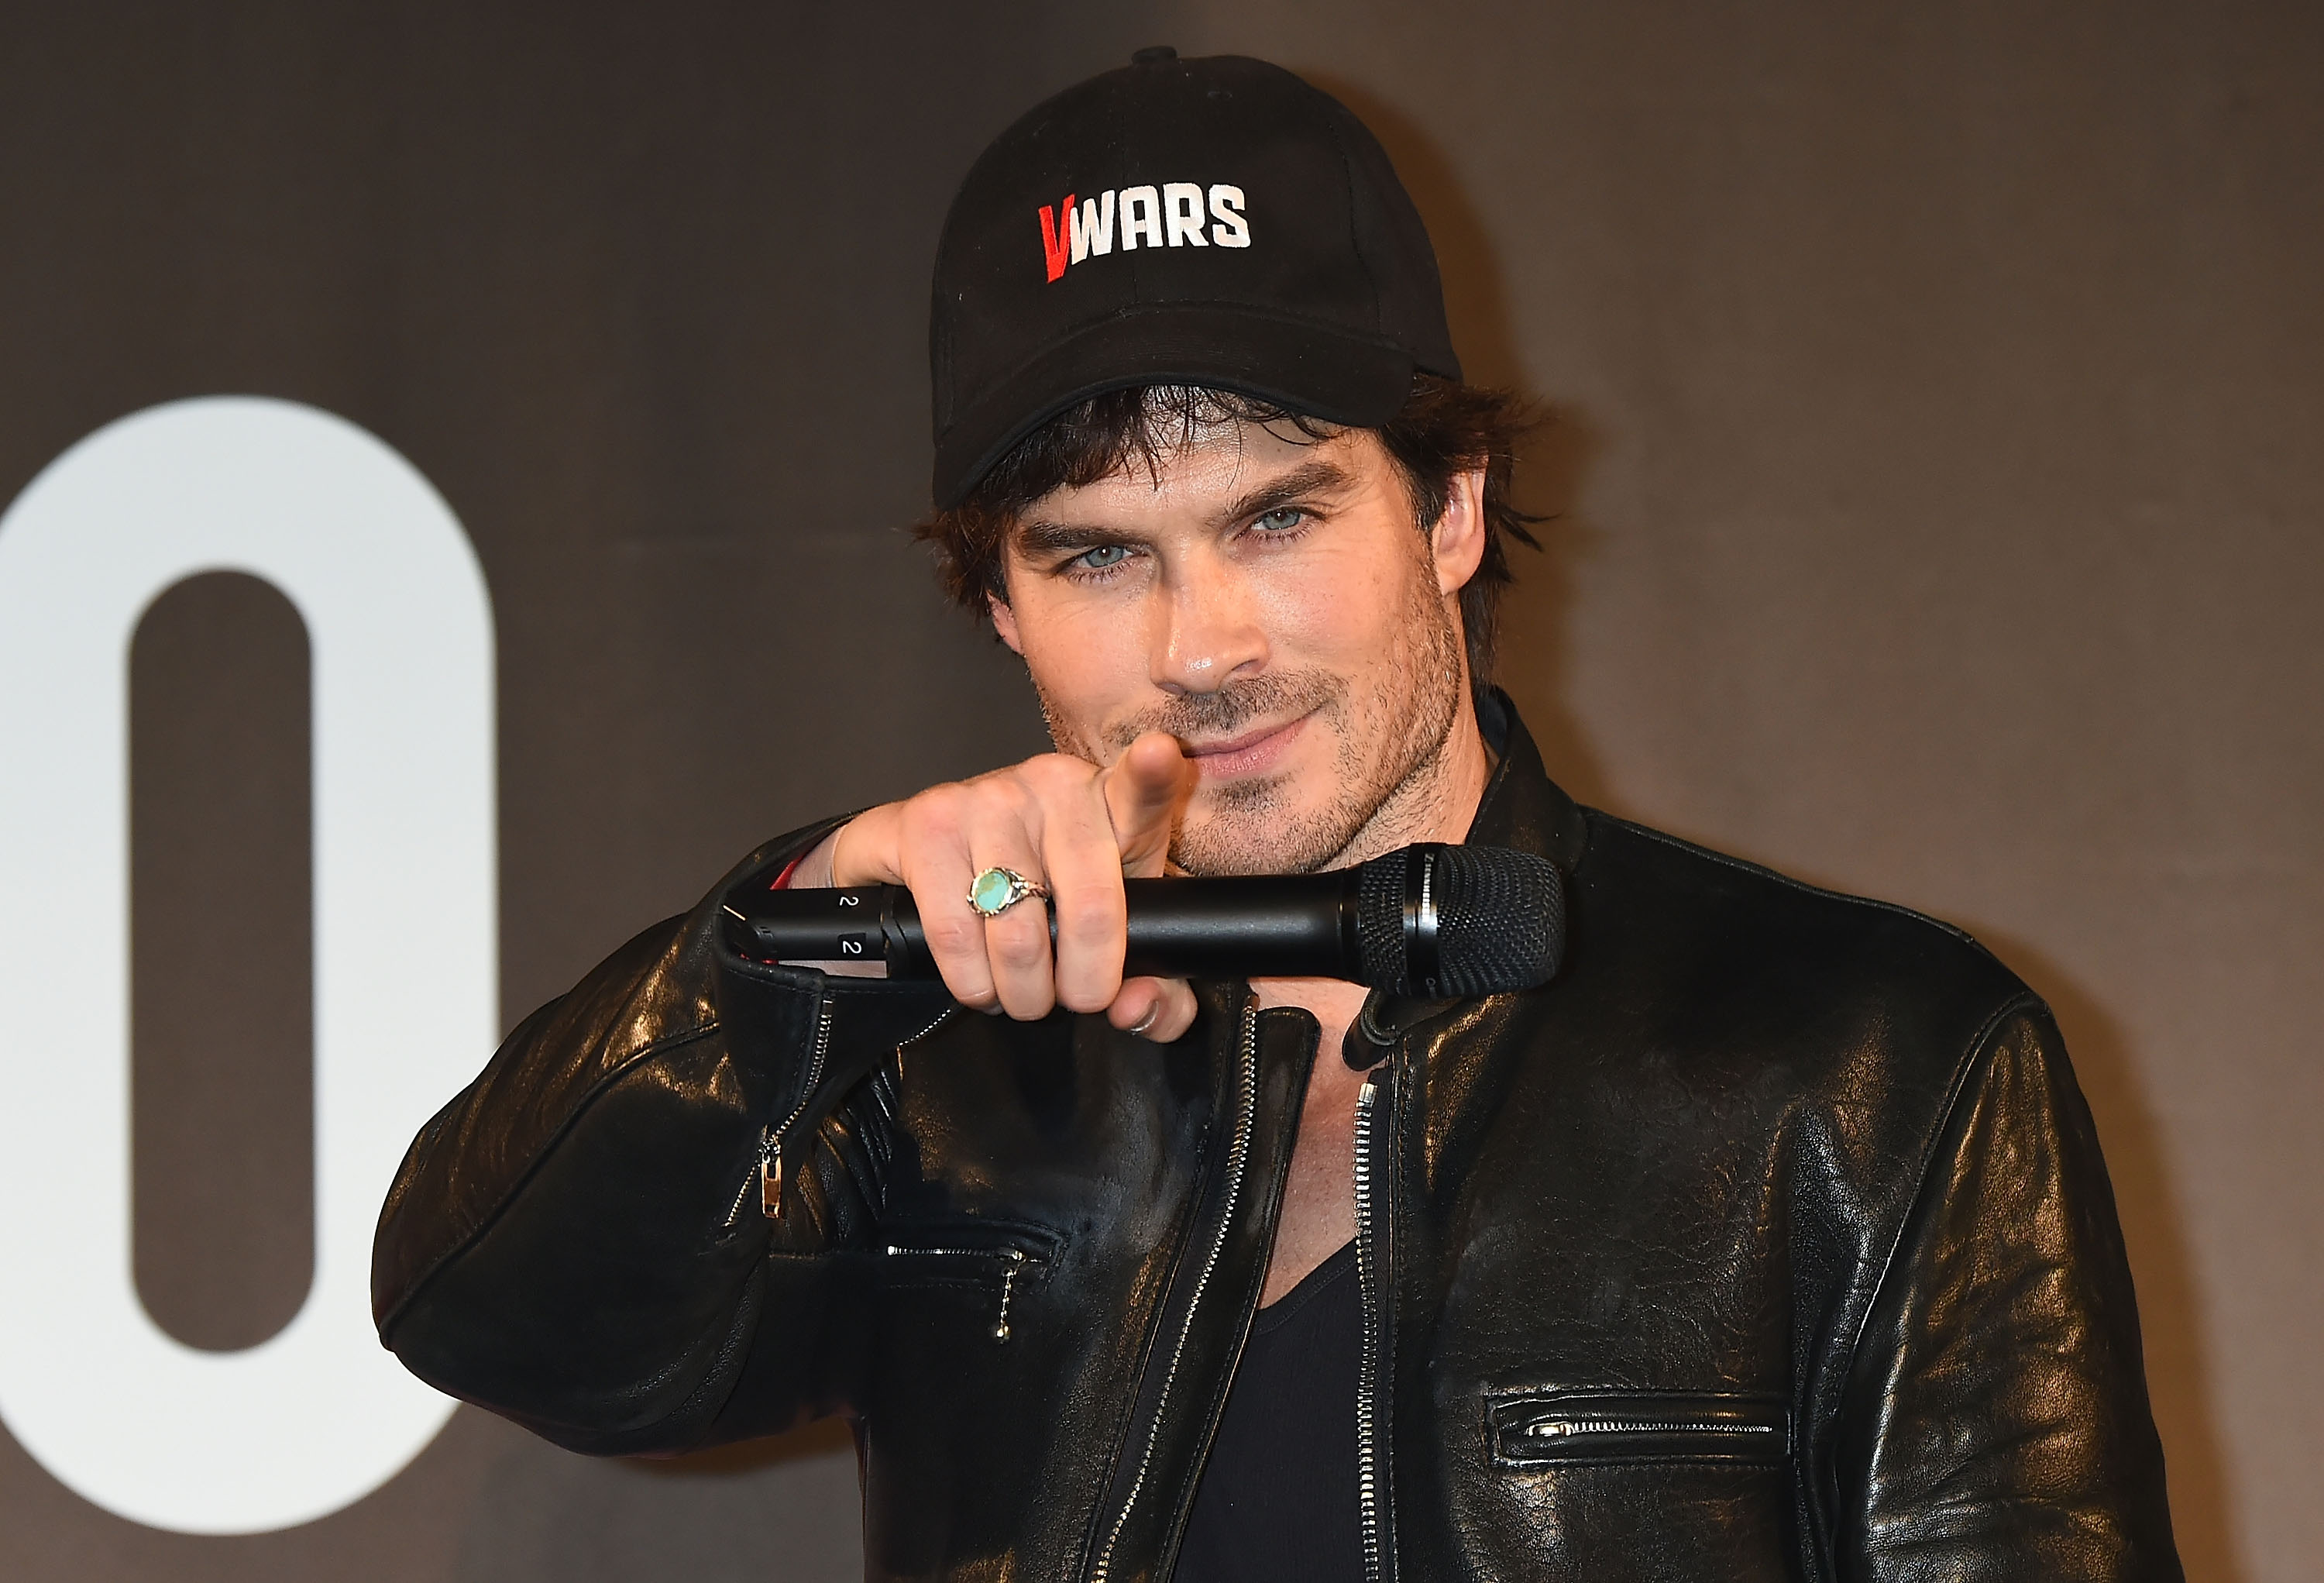 I Talked To Ian Somerhalder About Vampires But We Agreed The Climate Crisis Sucks More